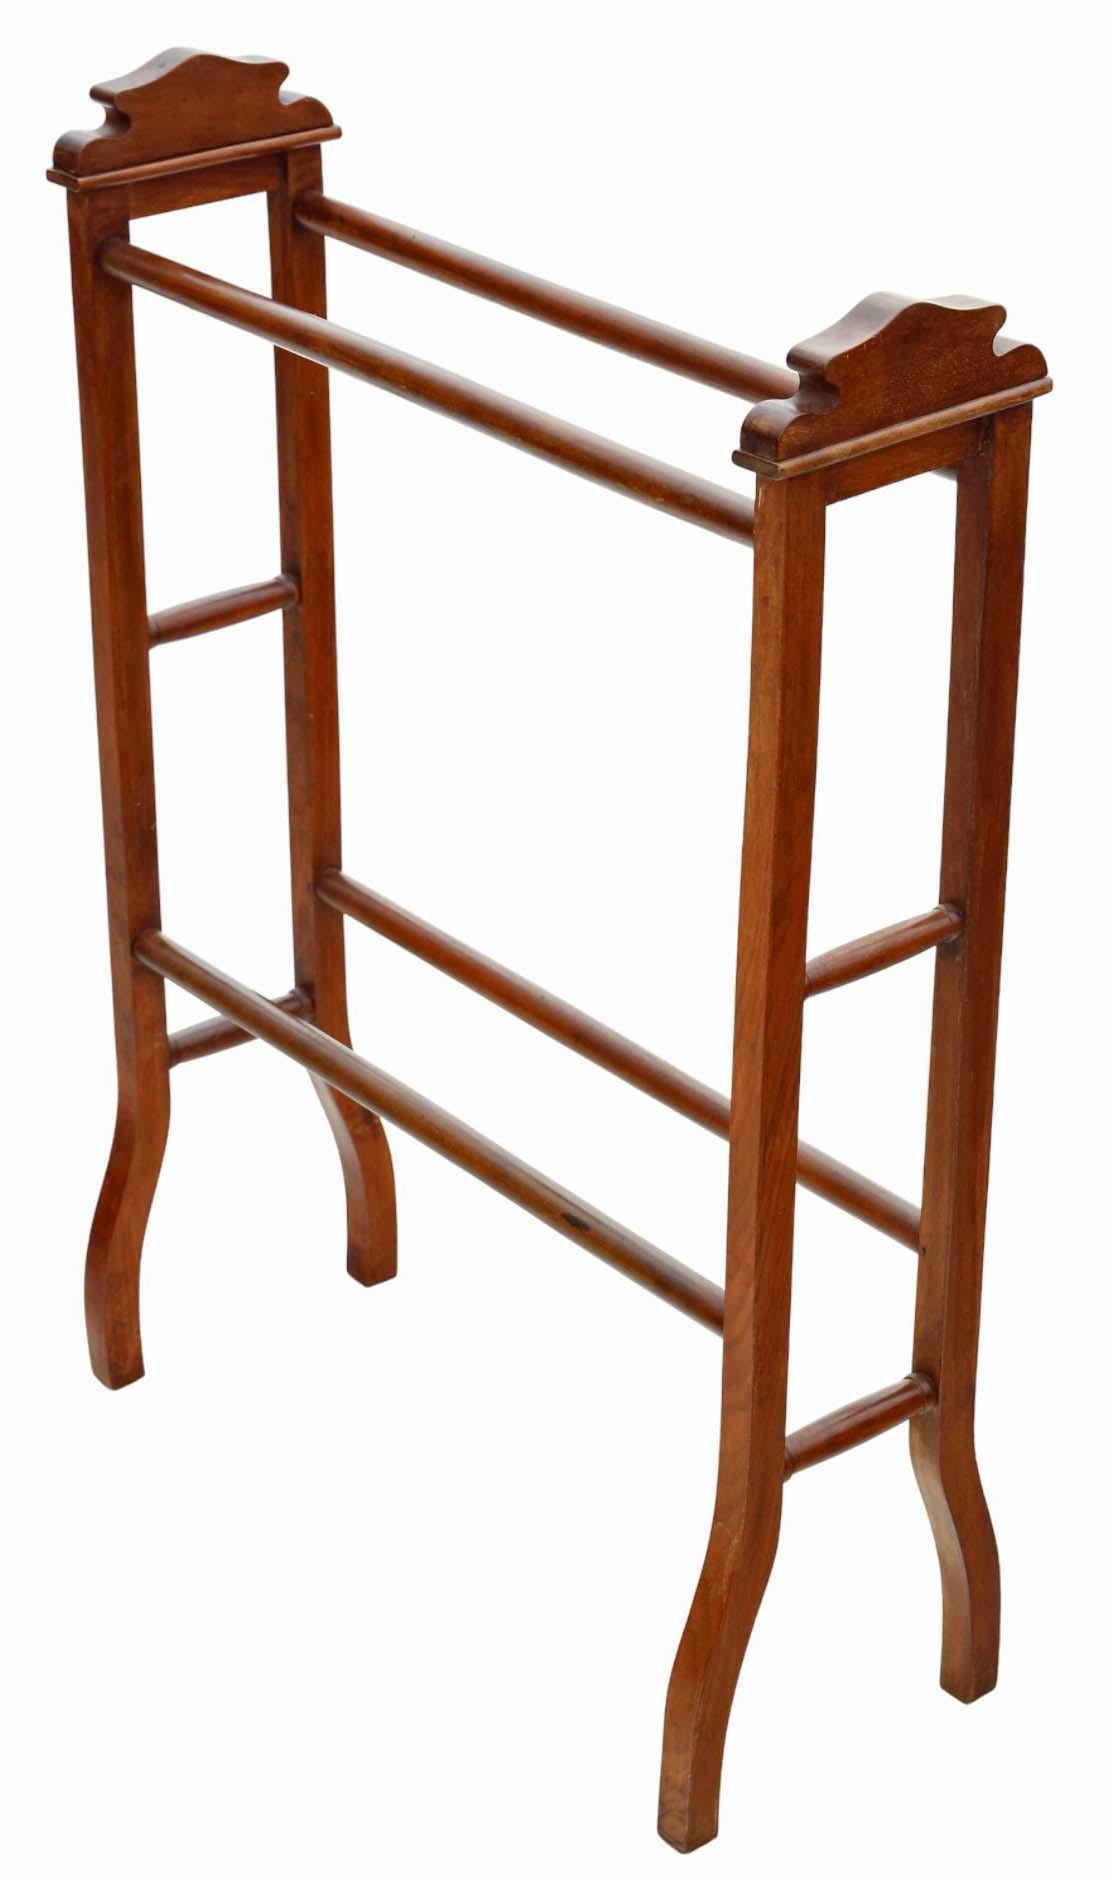 Antique Victorian mahogany Towel Rail Stand - Quality Art Nouveau C1900 In Good Condition For Sale In Wisbech, Cambridgeshire